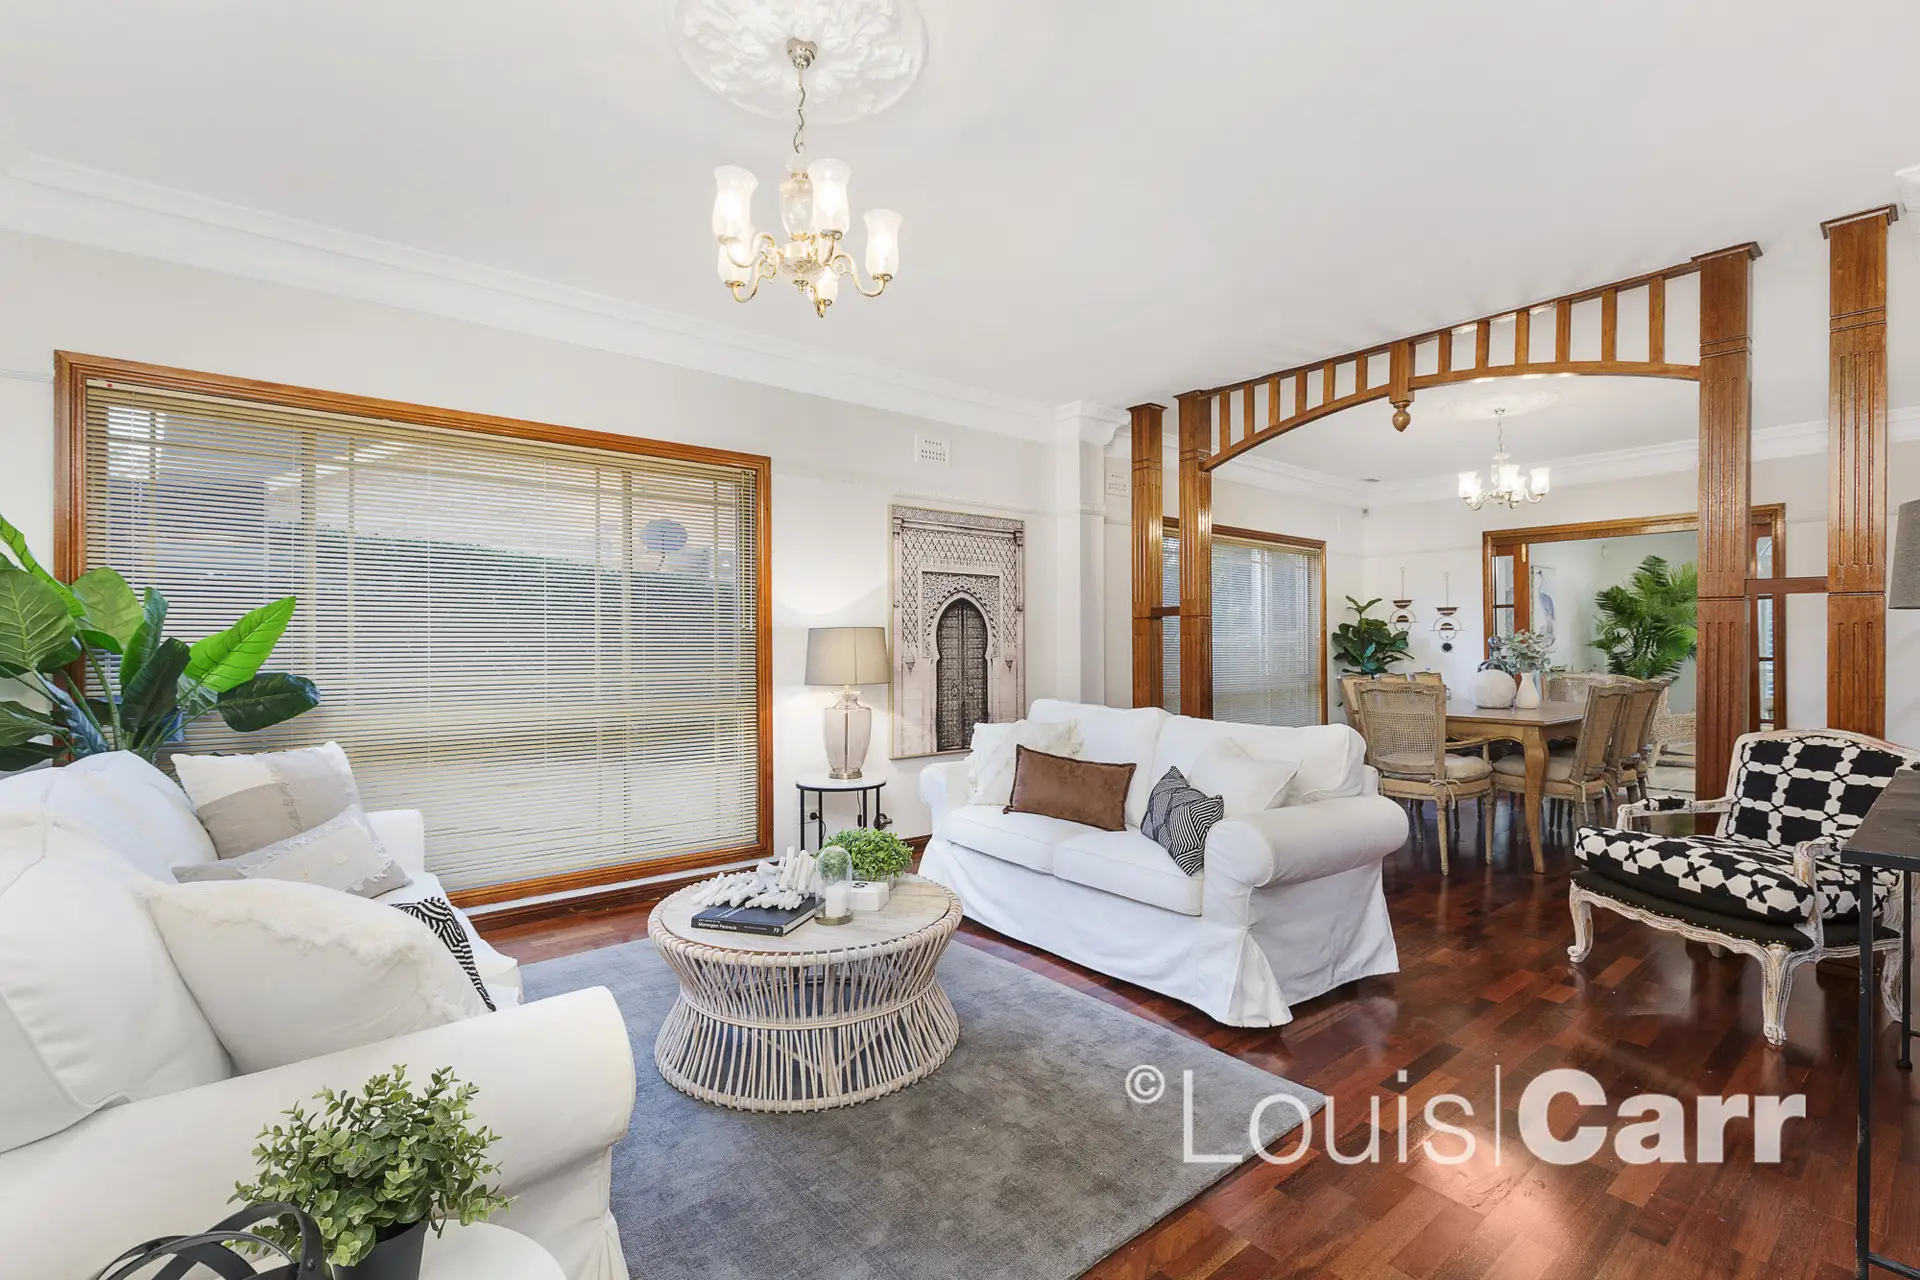 Photo #3: 30 Taylor Street, West Pennant Hills - Sold by Louis Carr Real Estate